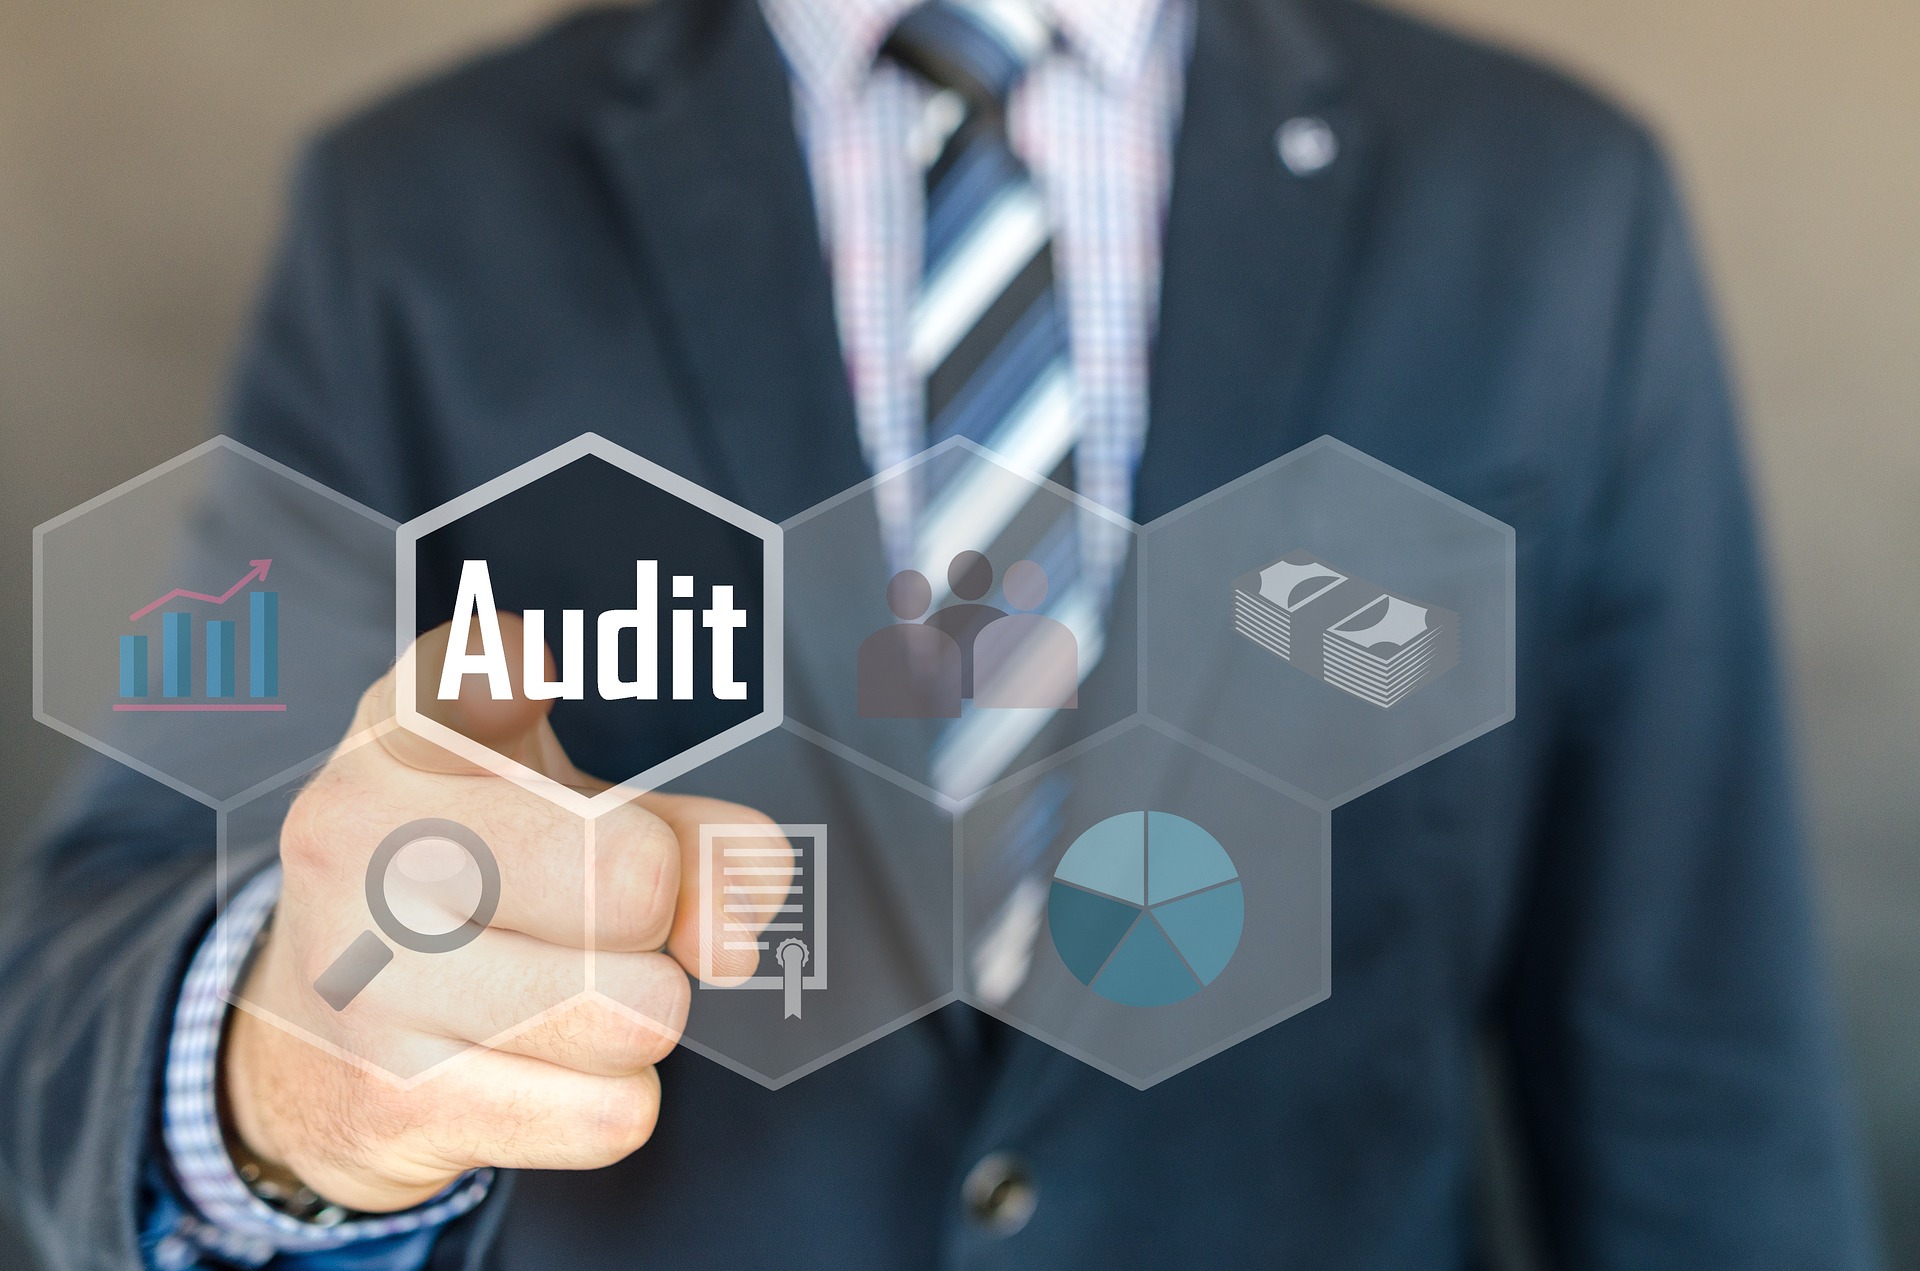 Here's how you can prepare and protect yourself from an IRS audit.